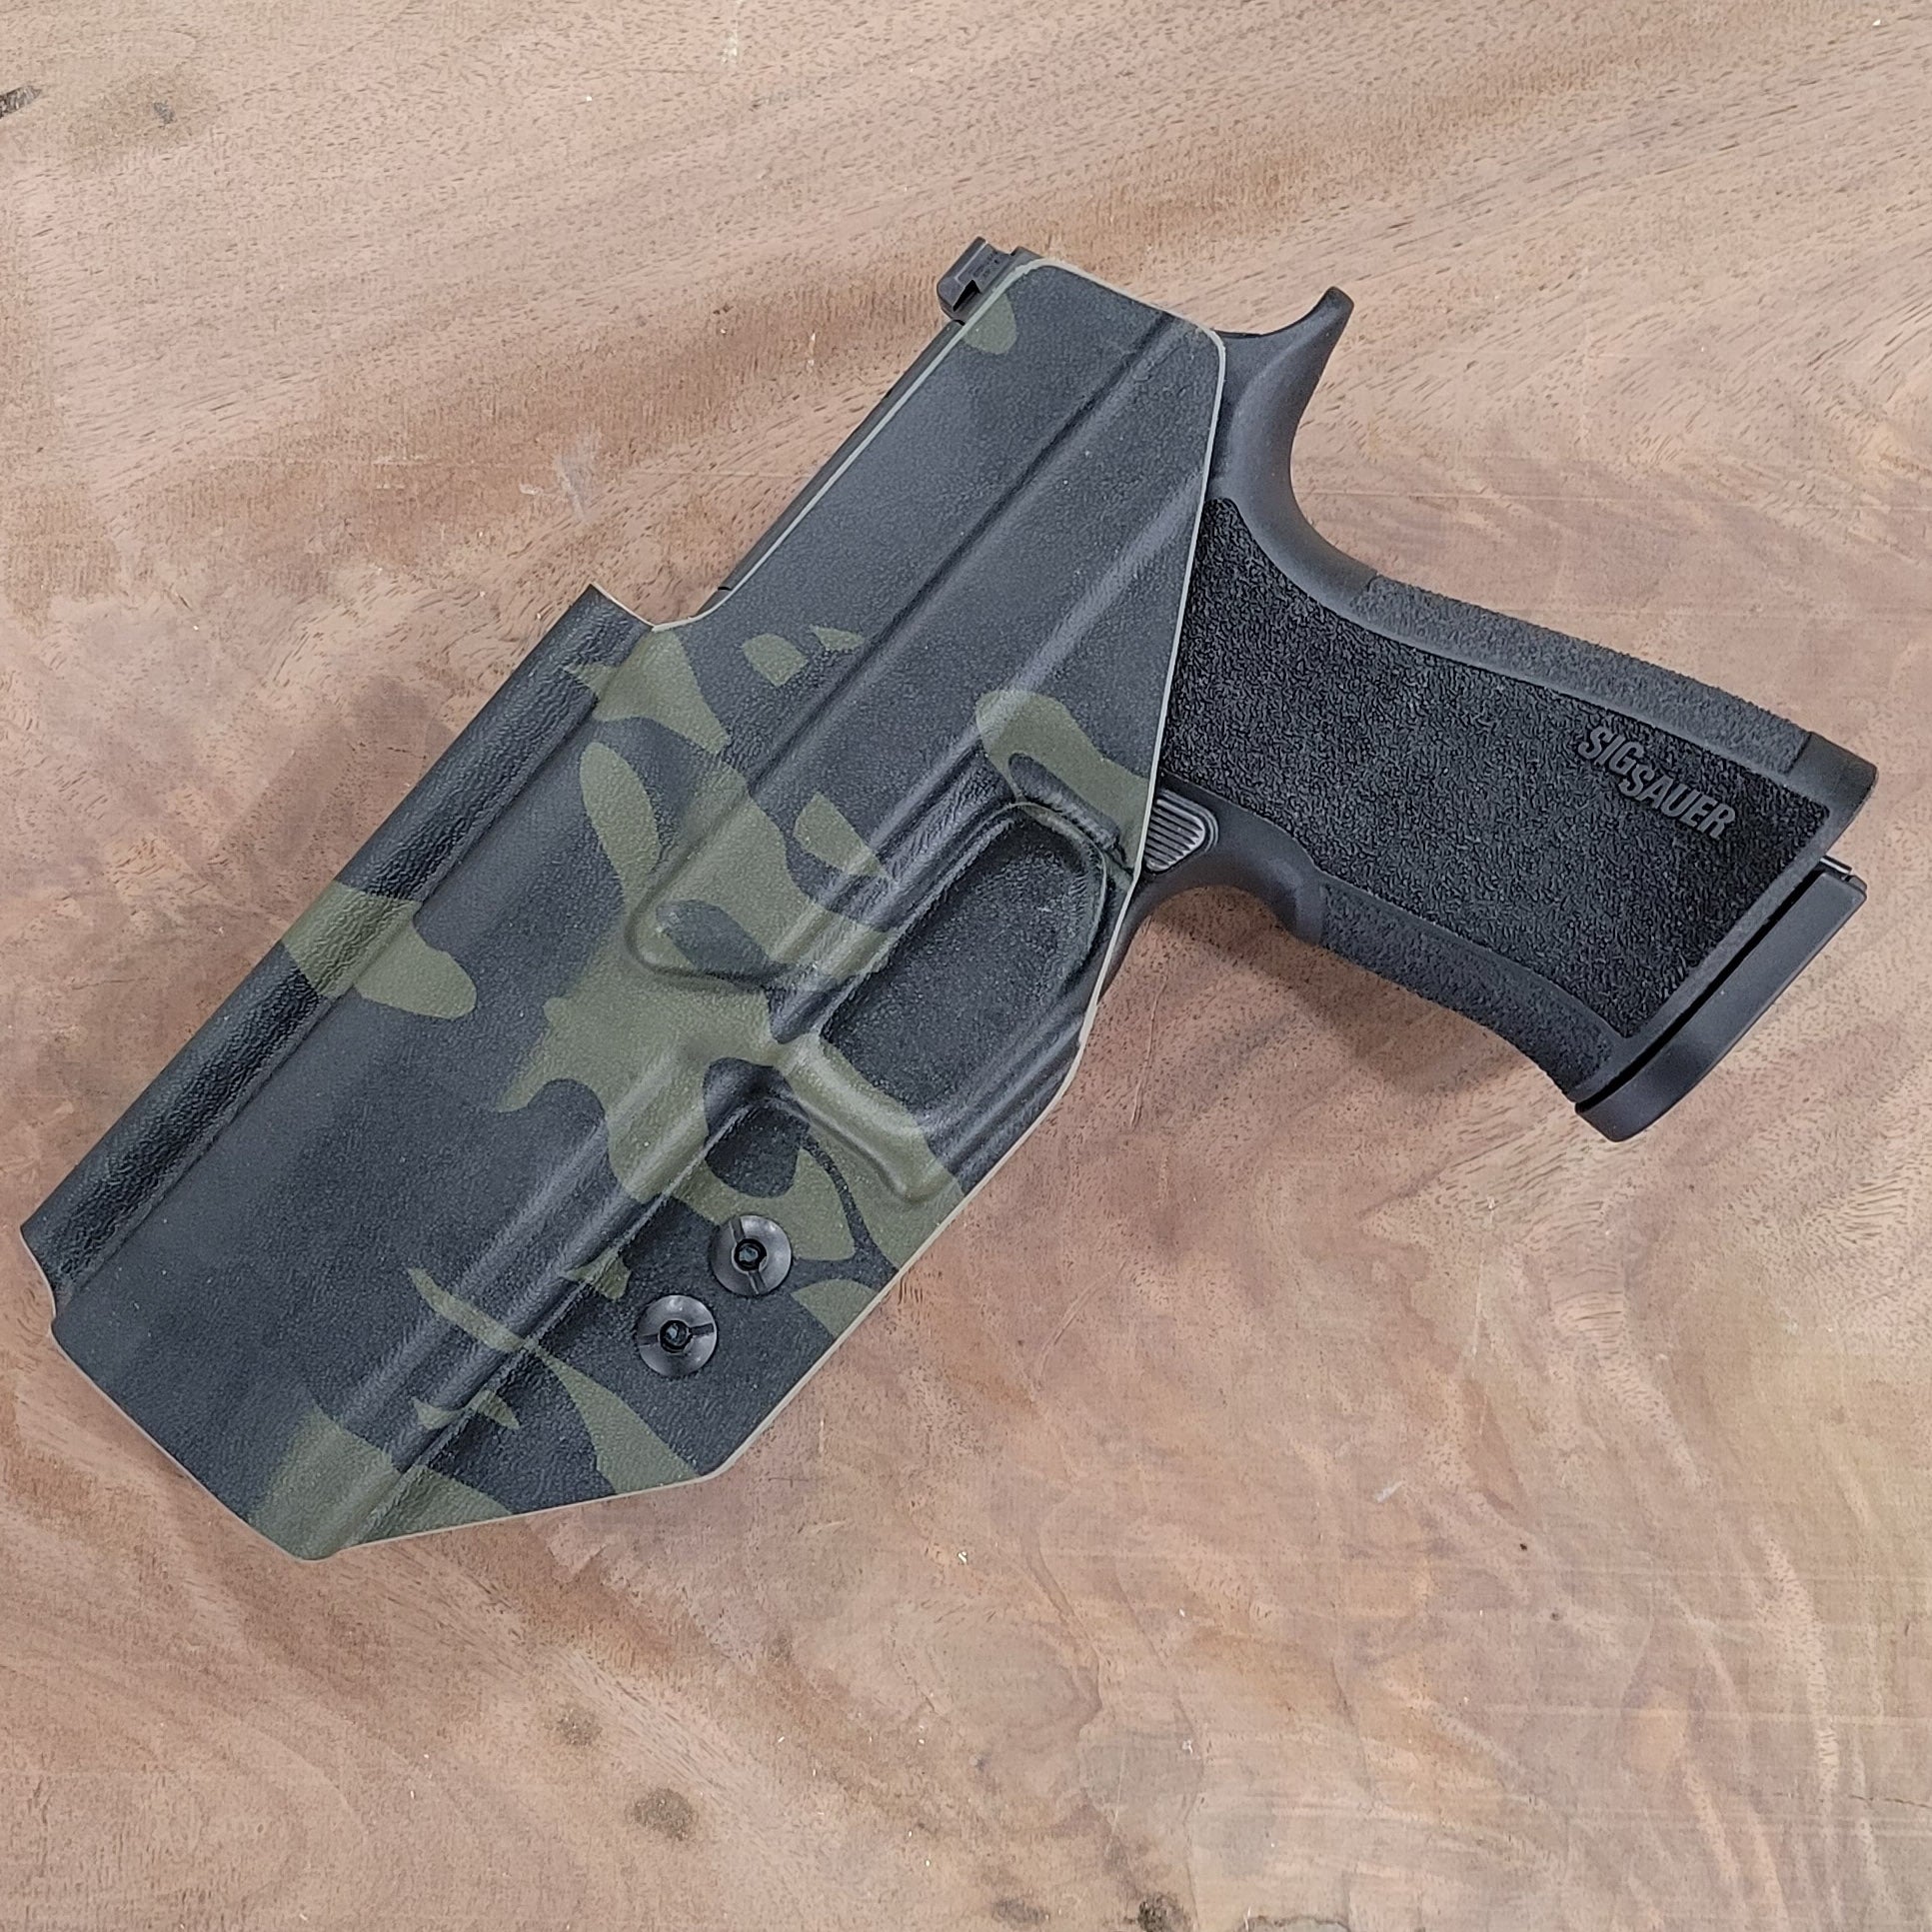 Inside Waistband IWB Kydex Taco Style Holster designed to fit the Sig Sauer 10MM . Full sweat guard, adjustable retention, open muzzle, and profiled for a red dot sight. Proudly made in the USA for veterans and law enforcement. 10 MM P320-XTEN, P320 X Ten or P 320 XTEN.